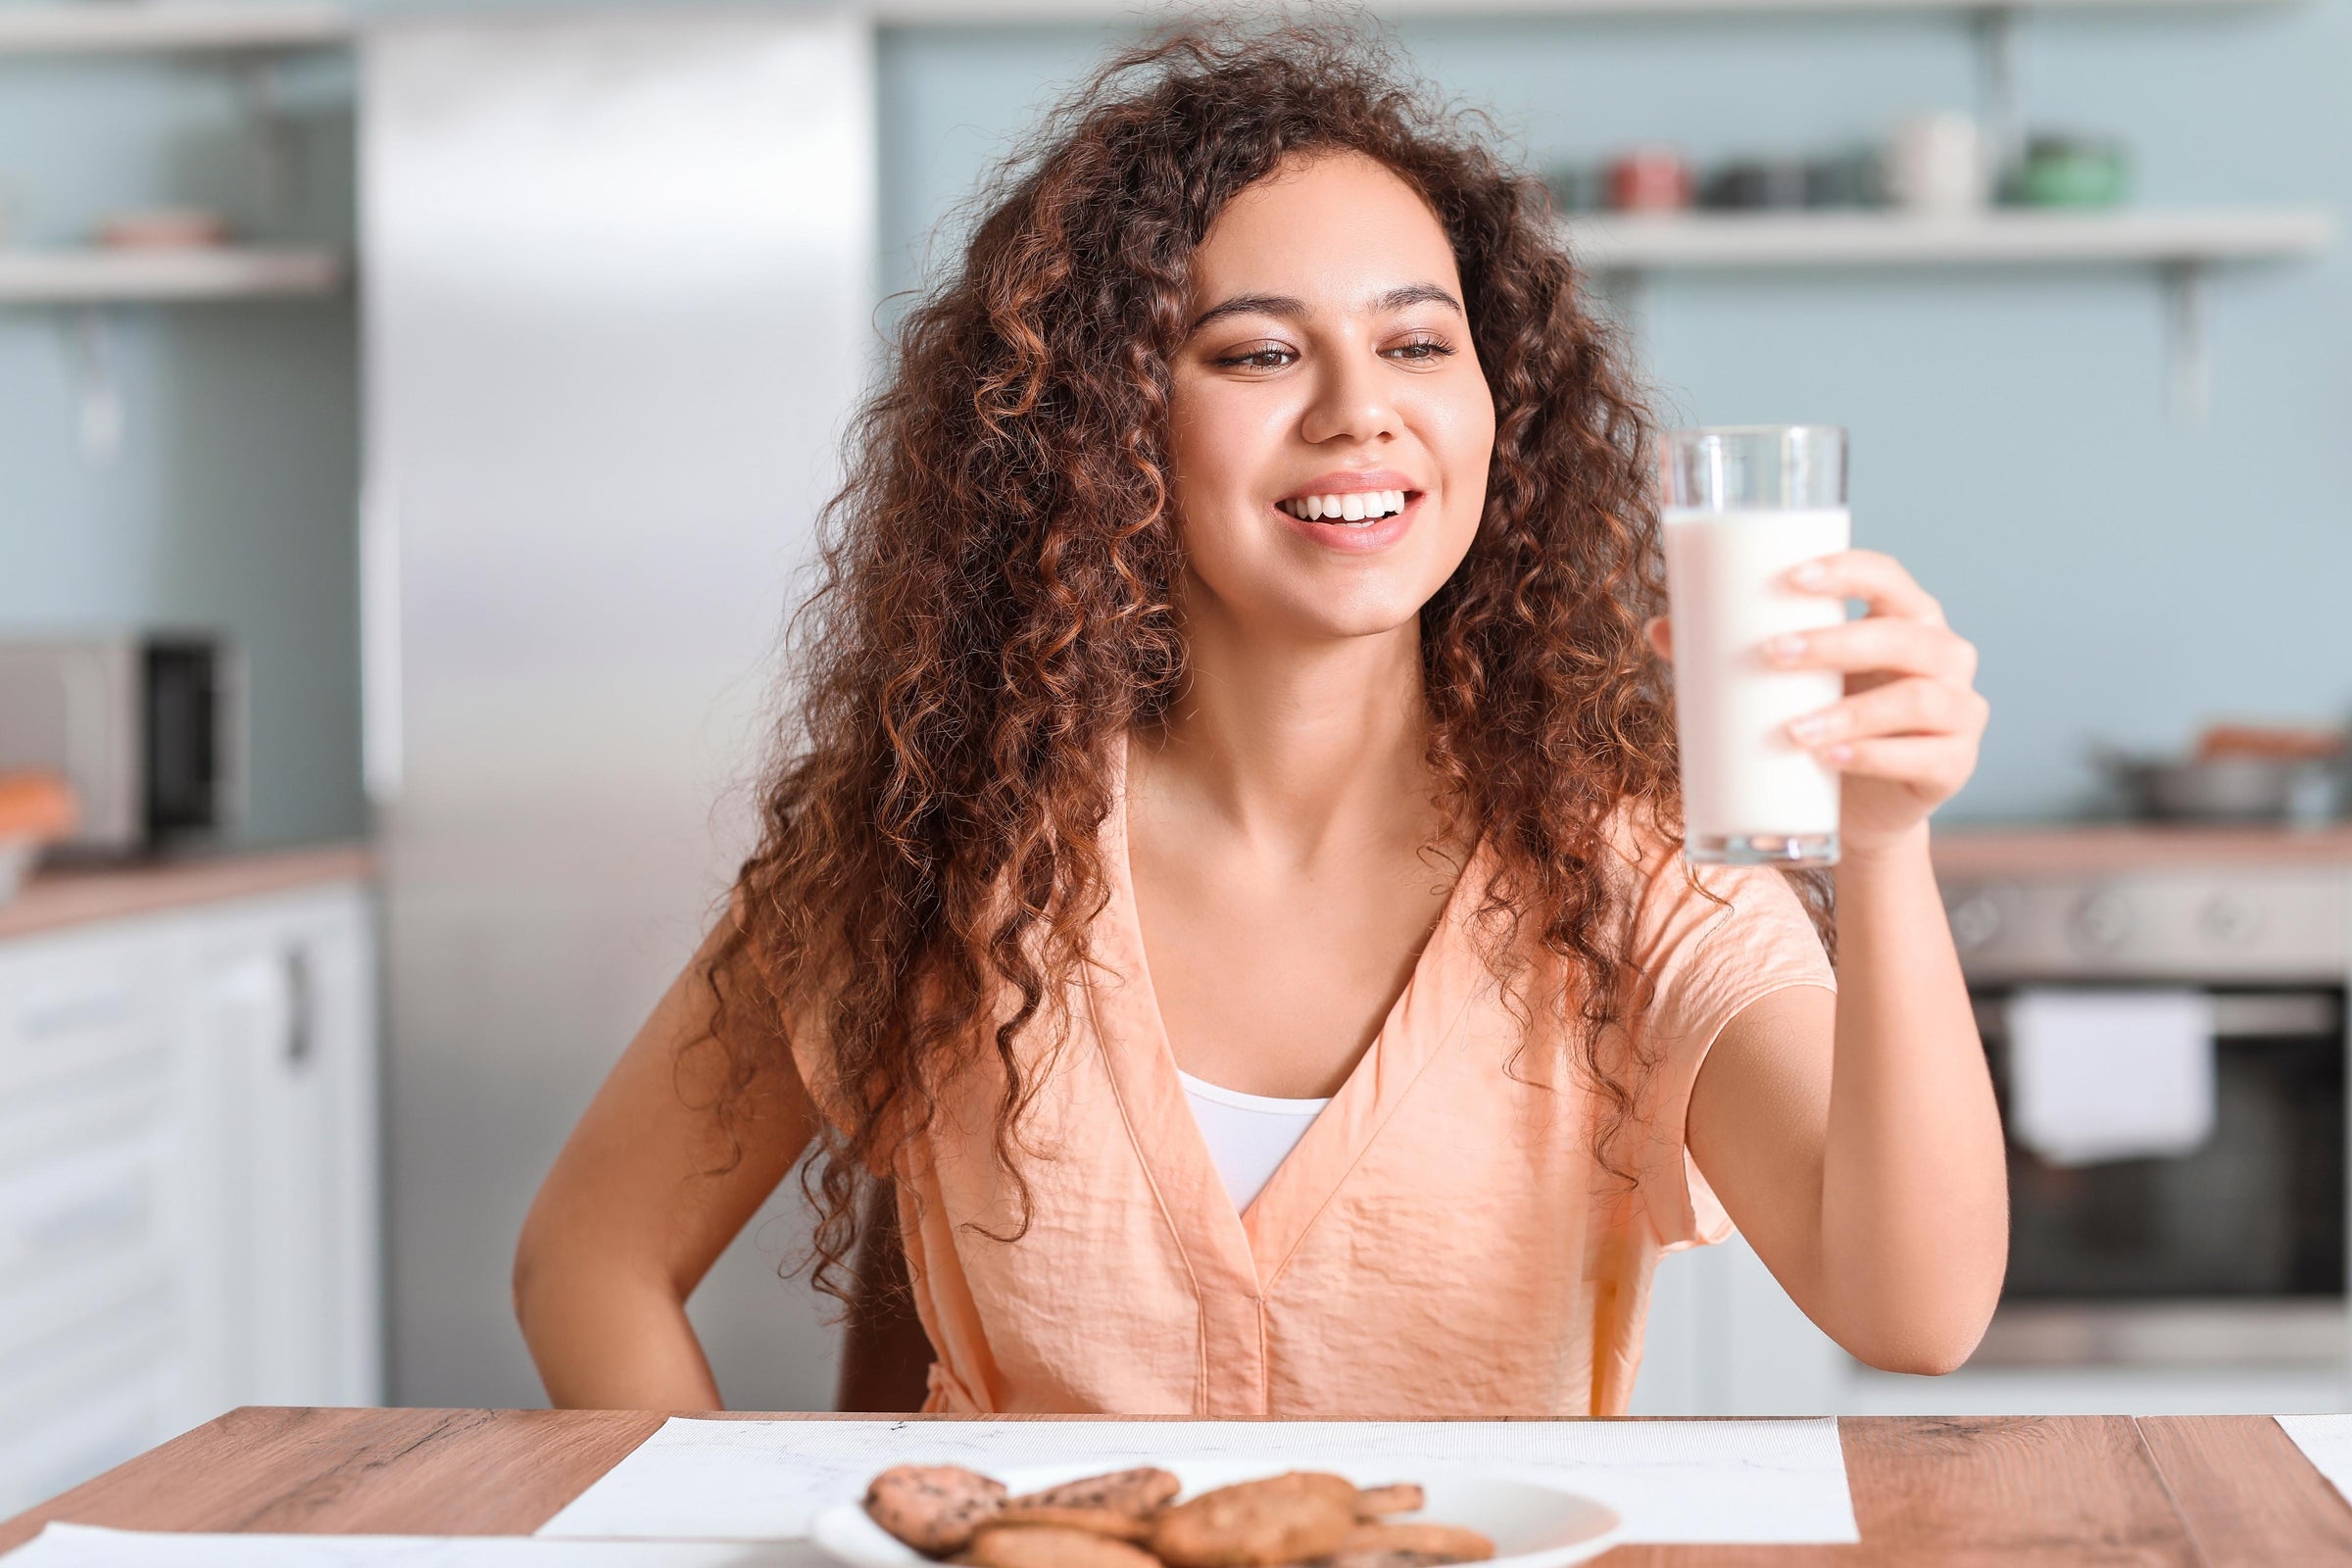 Curly-haired woman holding a glass of collagen for breakfast, which is the schedule that she finds to be the best time to take collagen